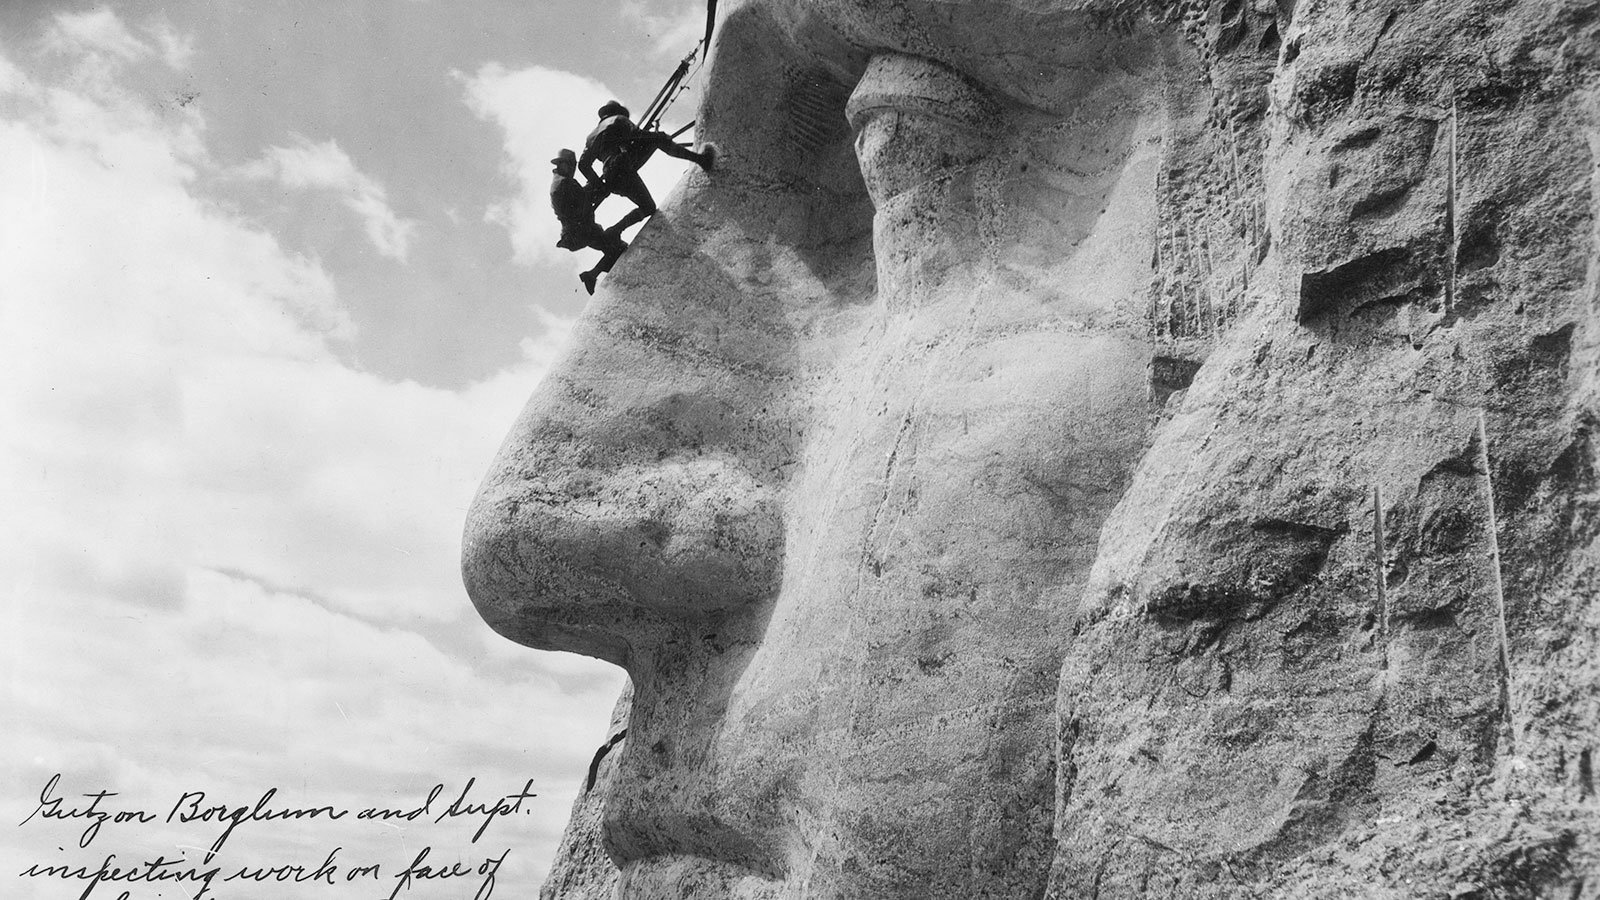 Gutzon Borglum and a superintendent inspecting work on the face of George Washington on Mount Rushmore